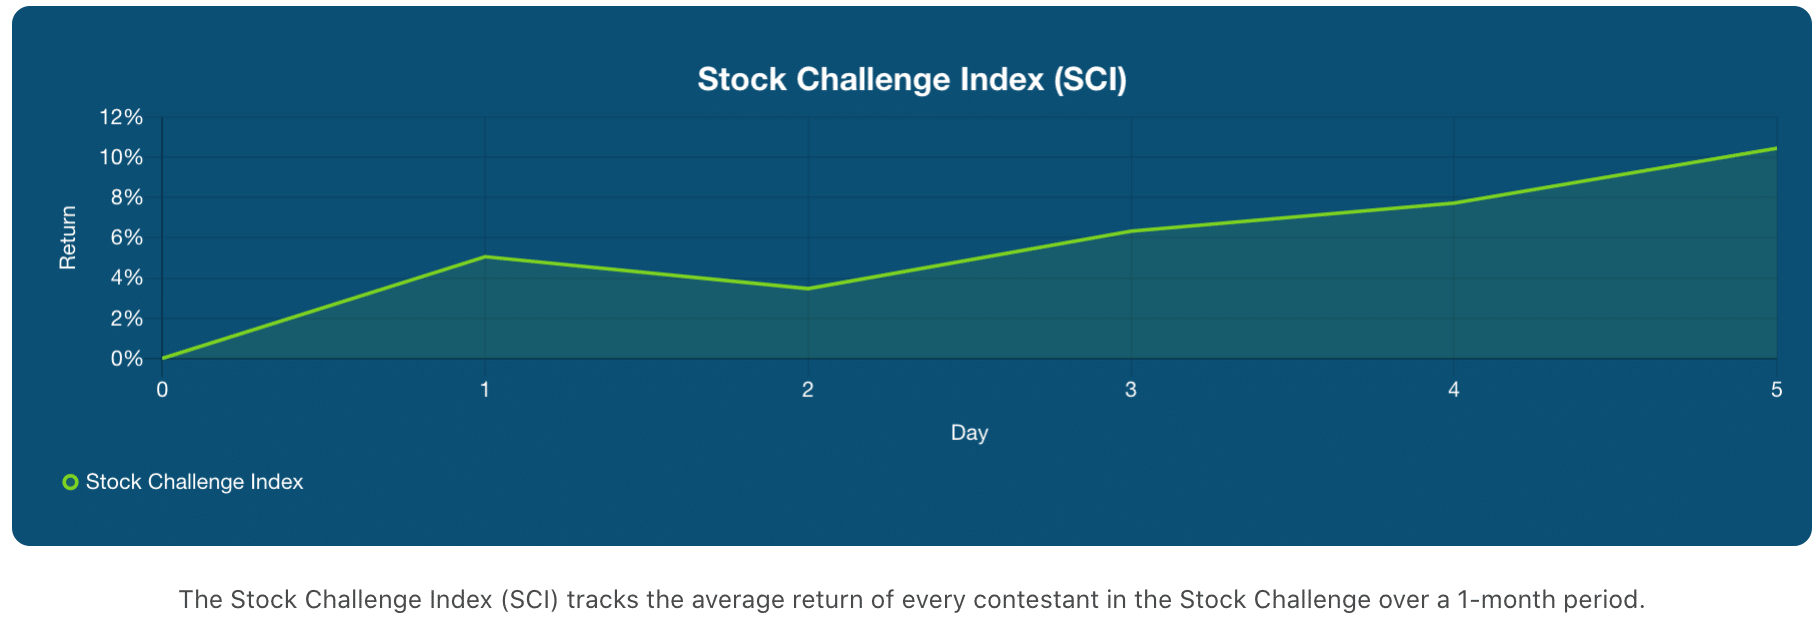 stock challenge index (sci) as of february 5, 2021